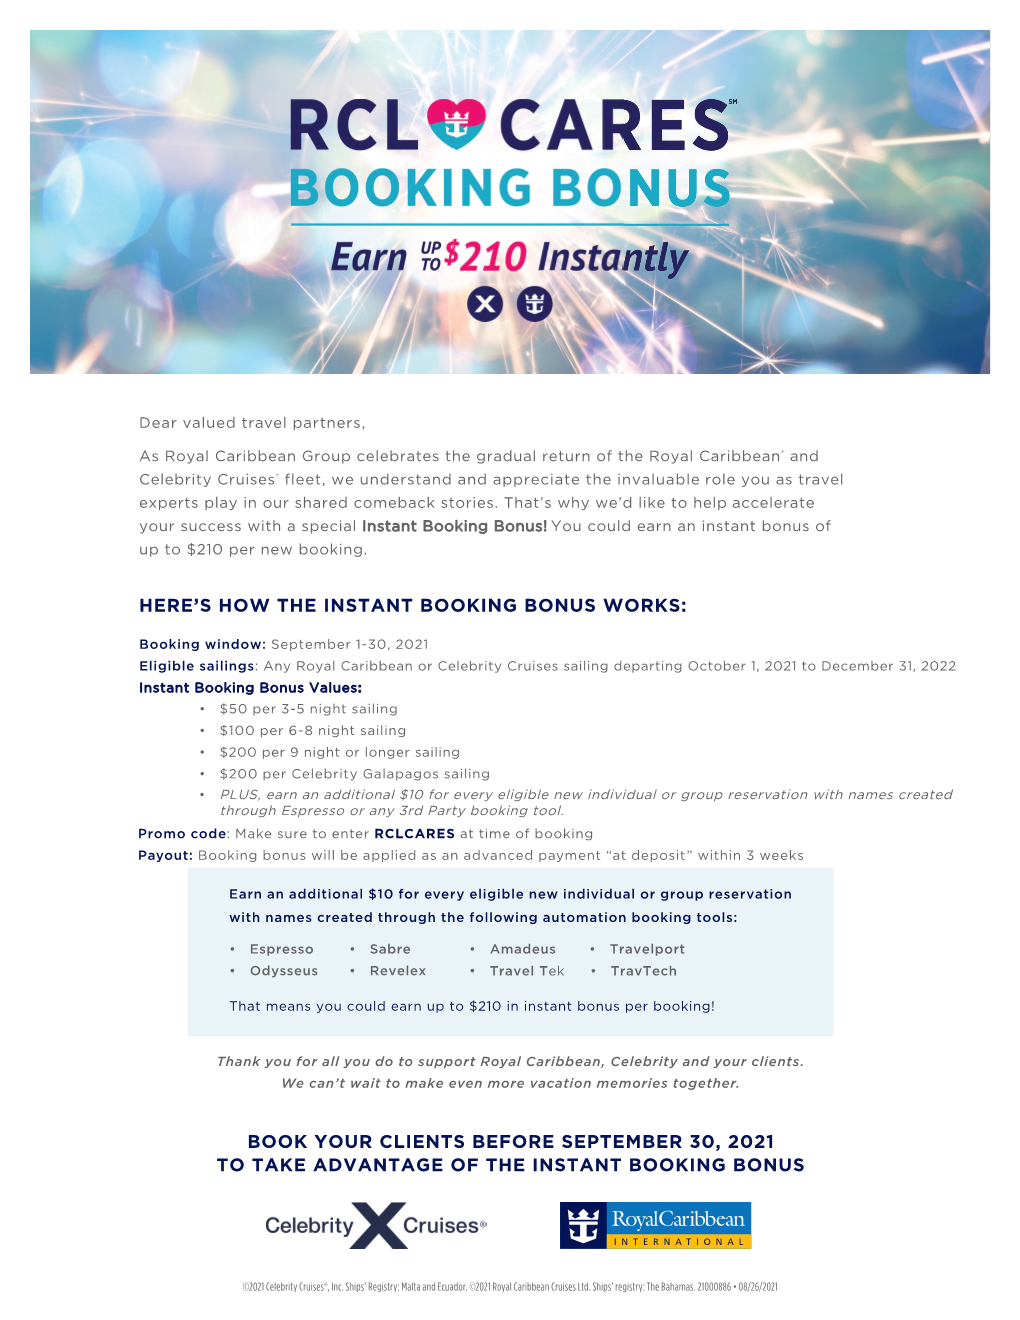 Here's How the Rcl Cares Instant Booking Bonus Works